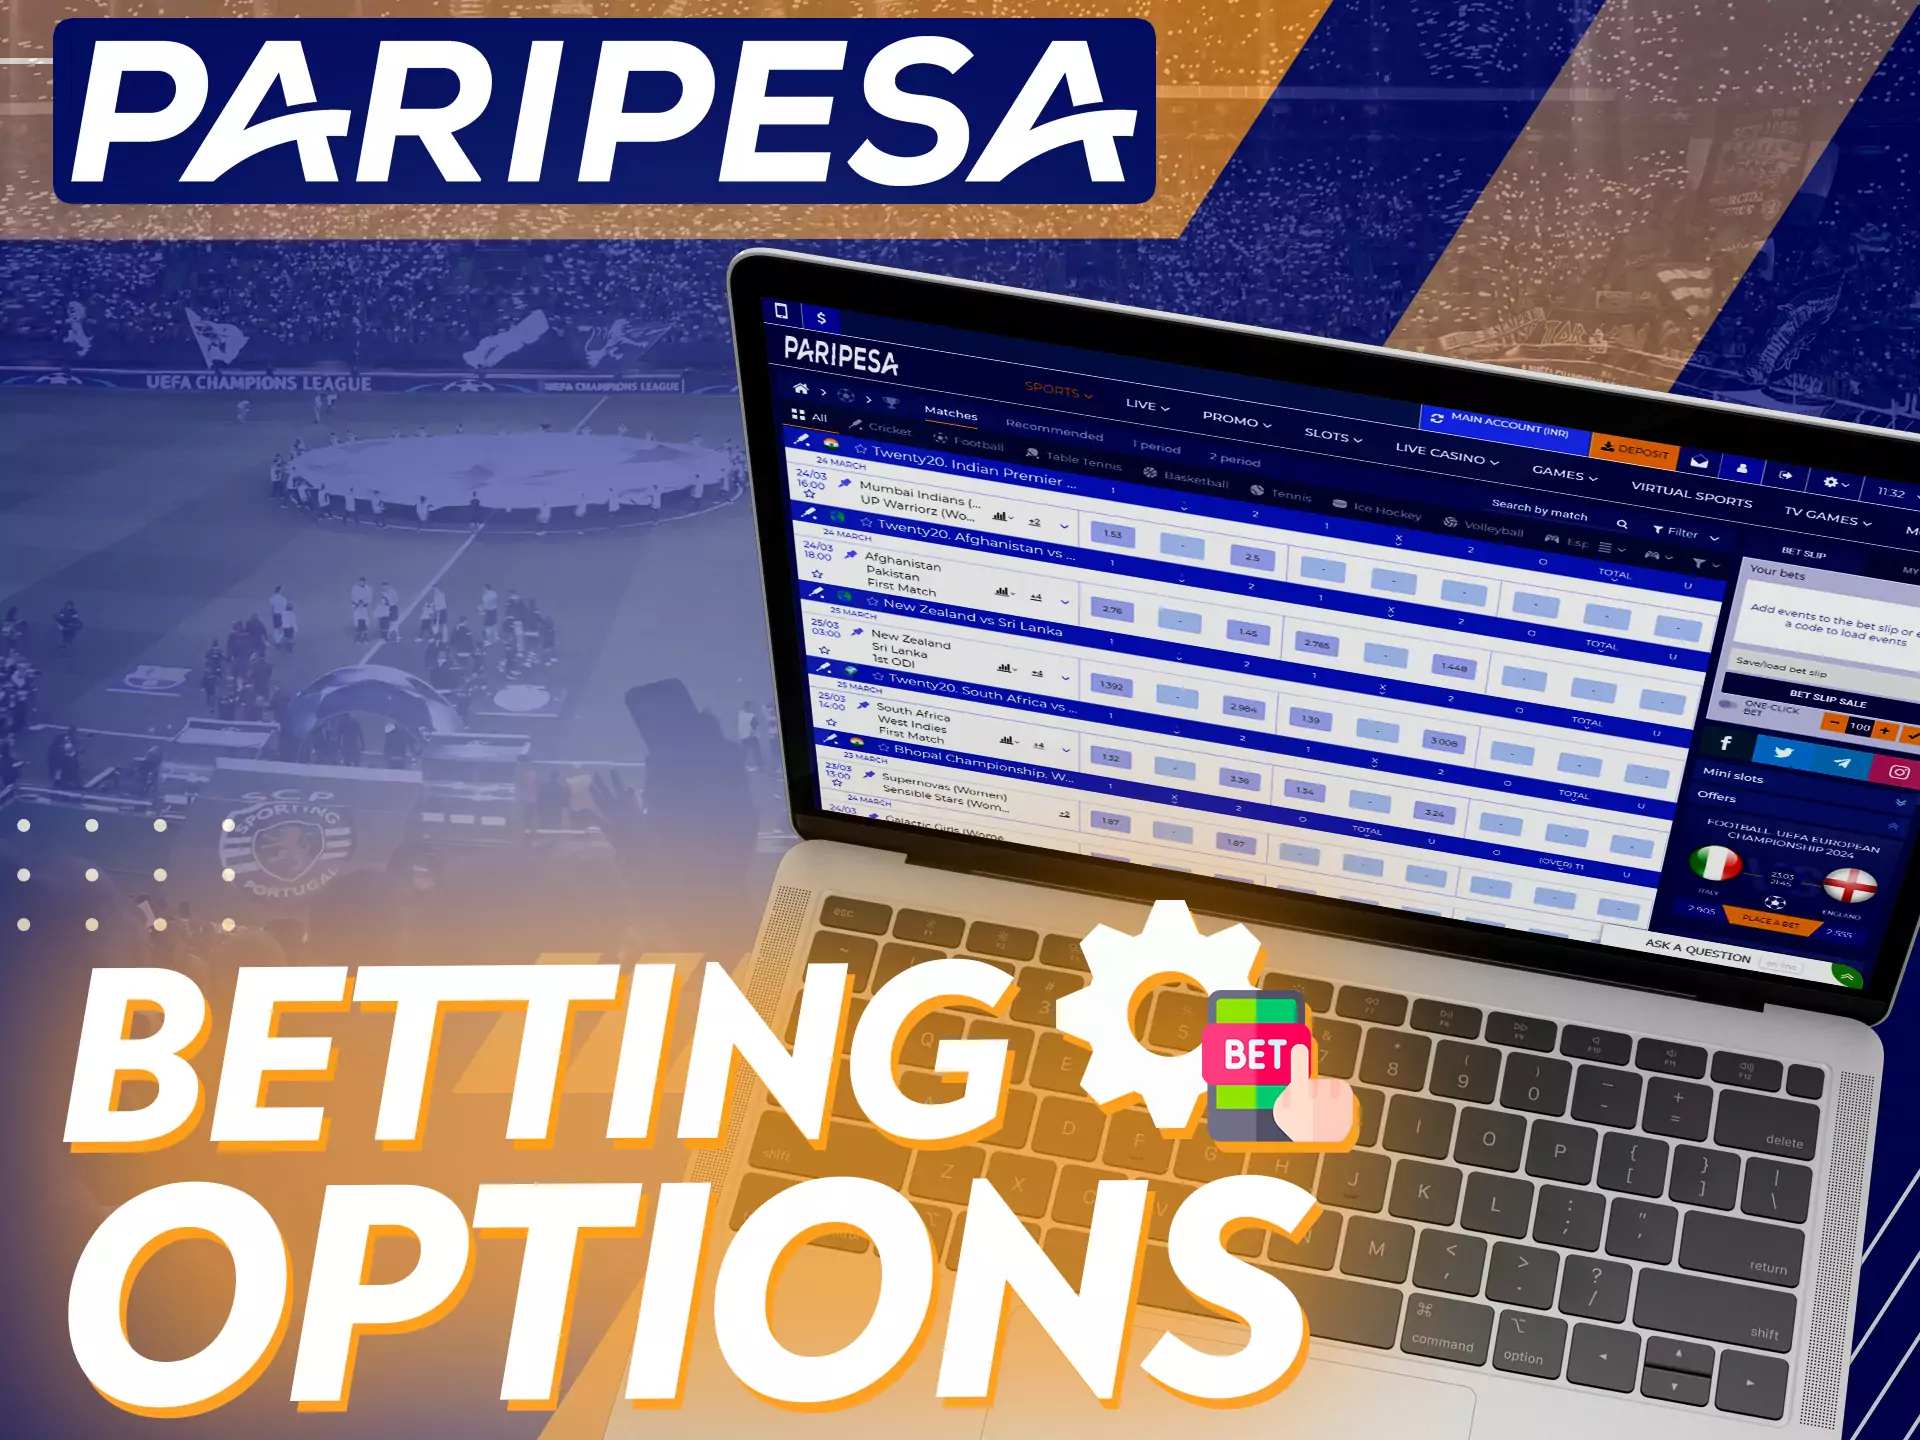 At Paripesa, take advantage of the different betting options.